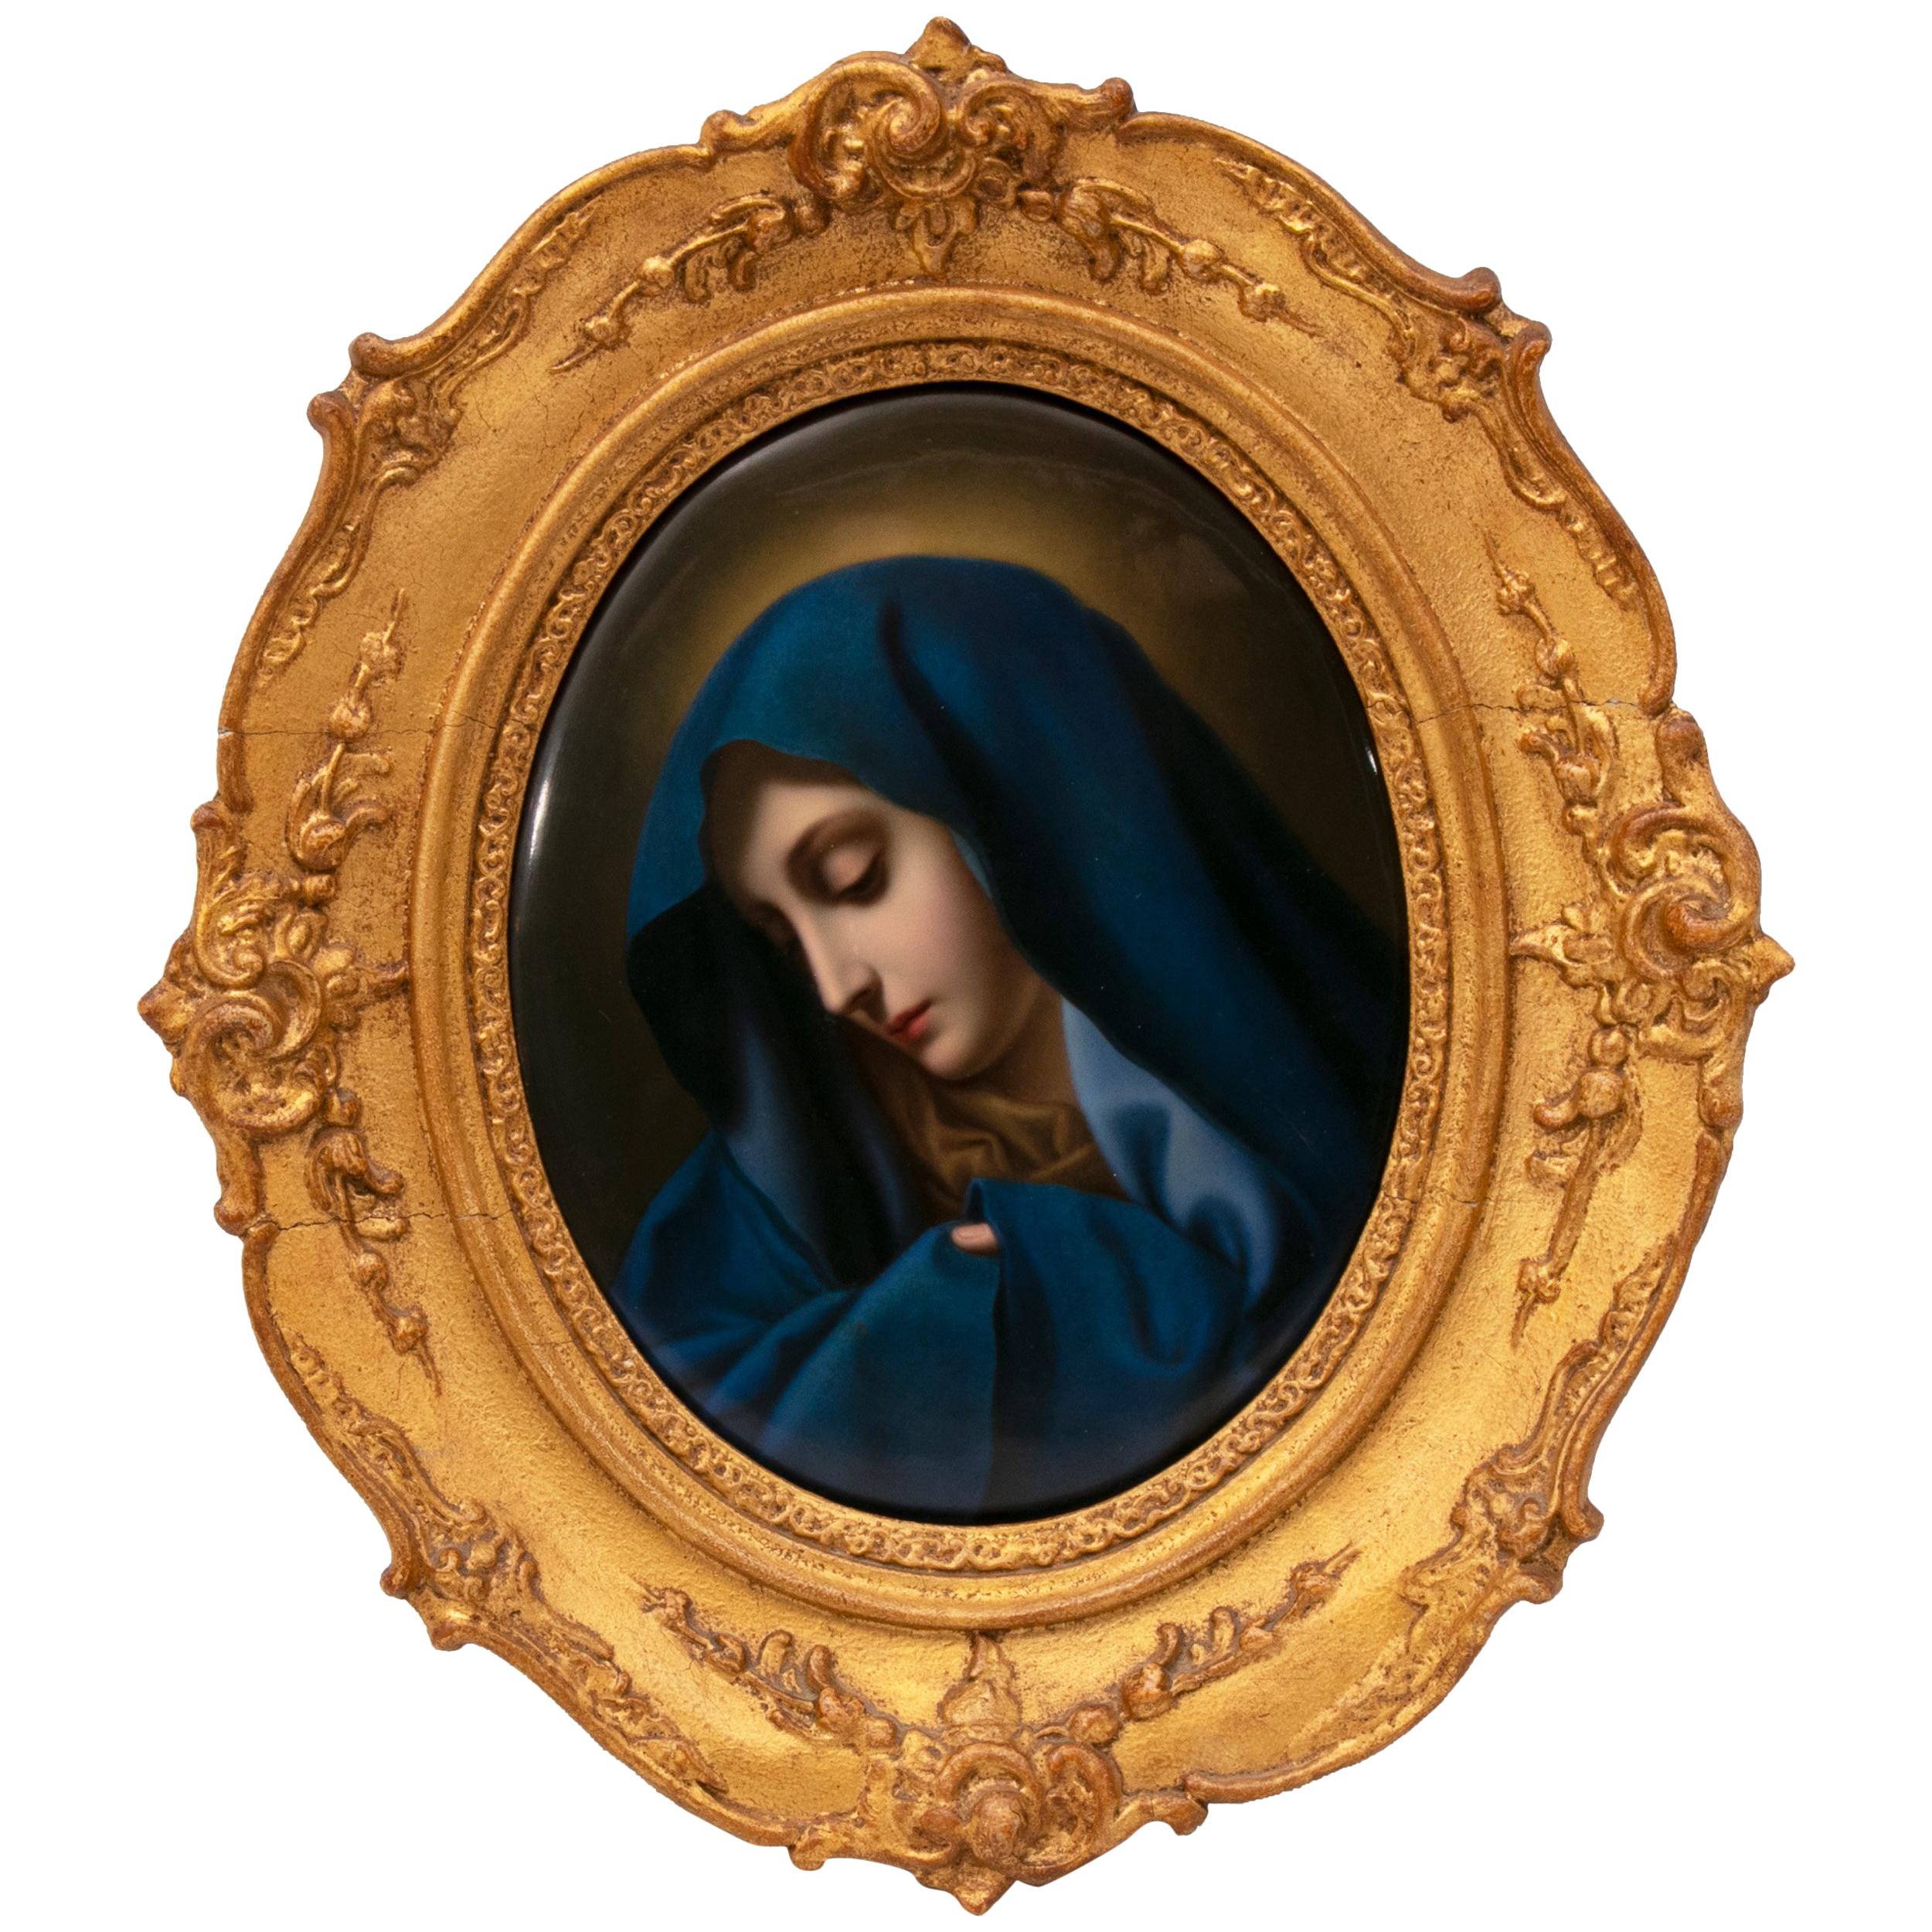 KPM Berlin Oval Porcelain Plaque with Image of Madonna, circa 1830